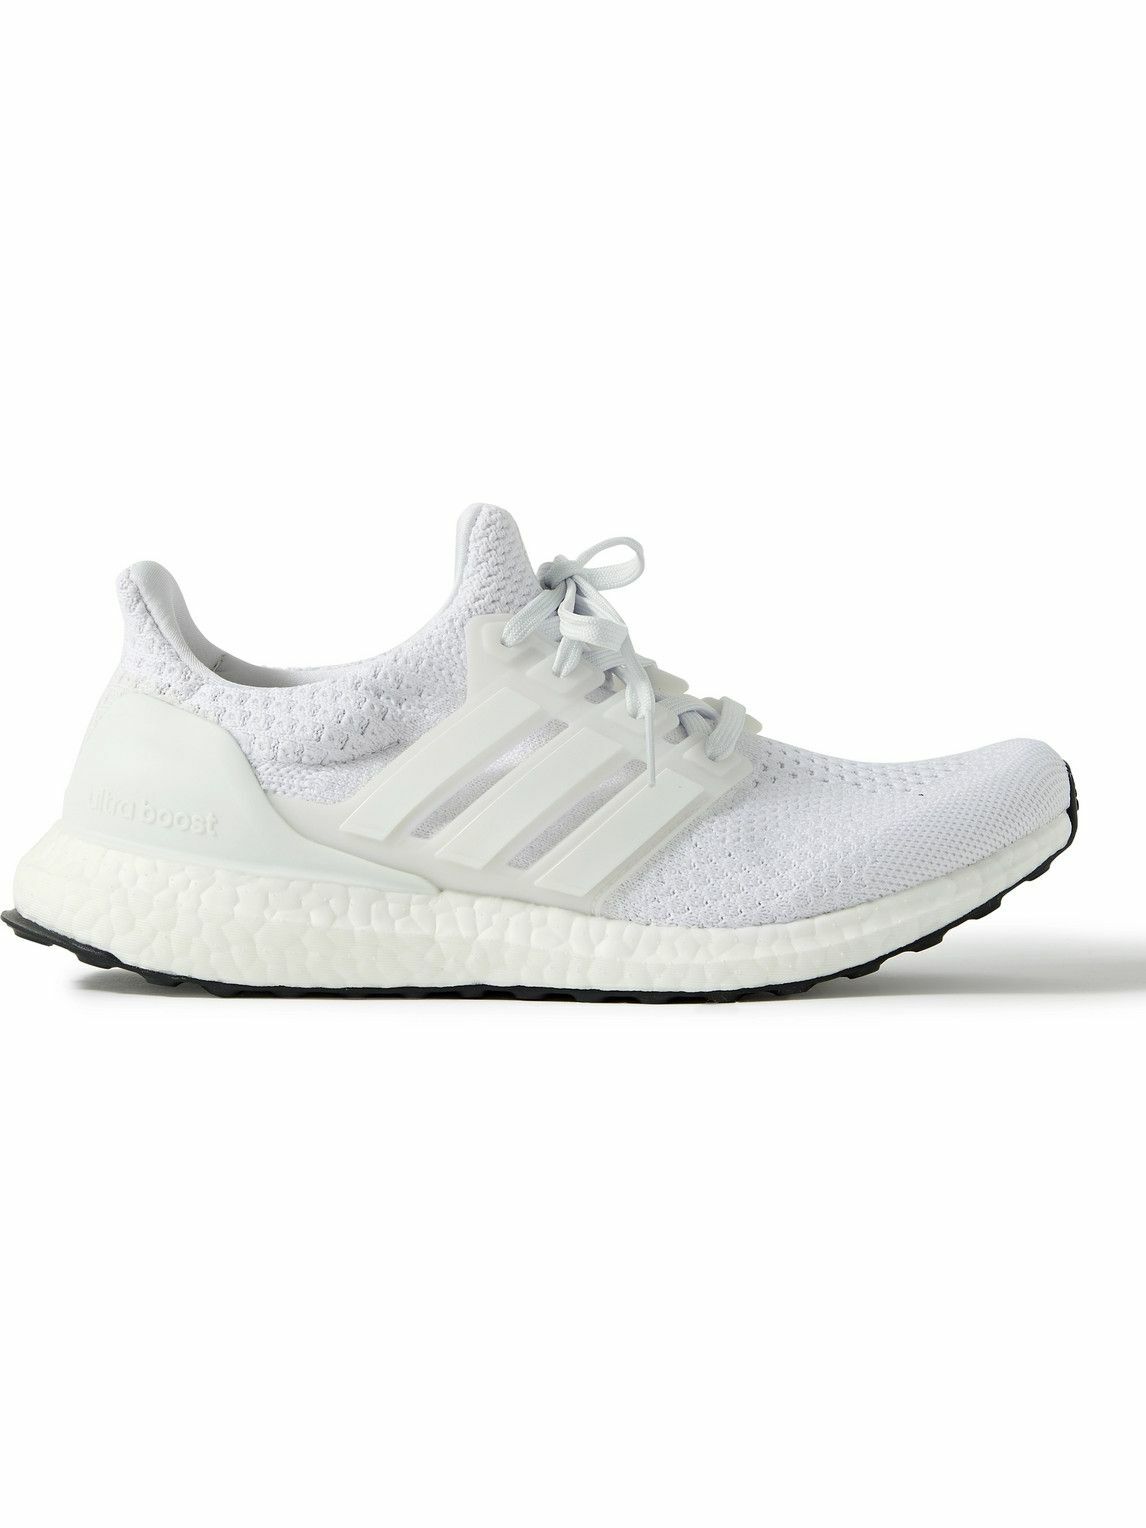 Photo: adidas Sport - Ultraboost 5.0 DNA Rubber-Trimmed Primeknit Running Sneakers - White